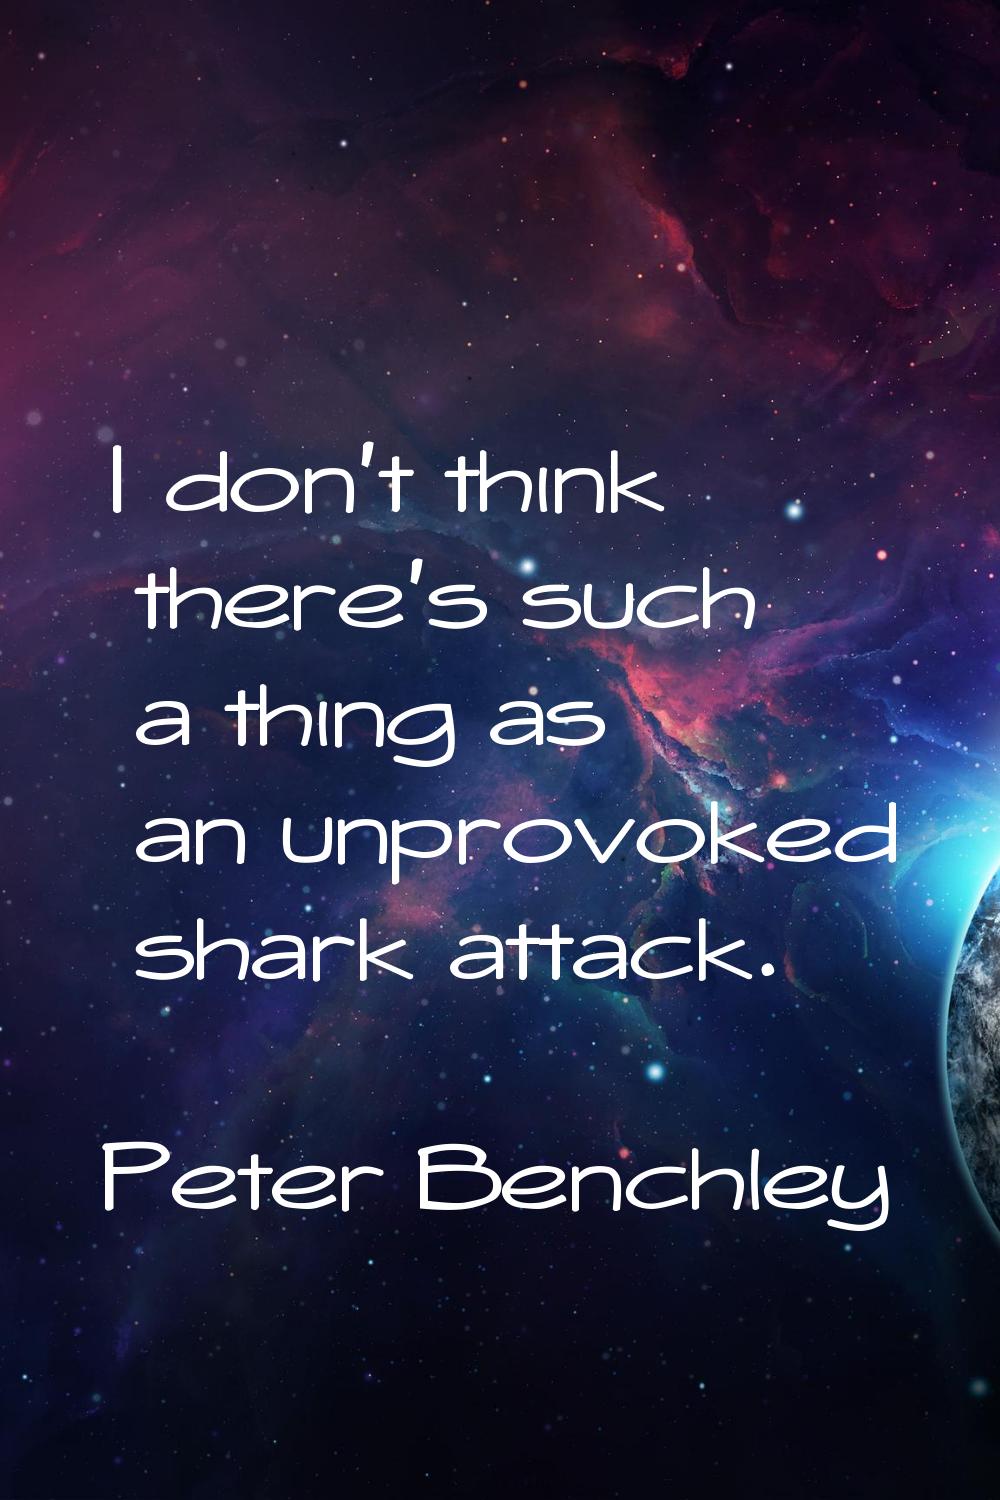 I don't think there's such a thing as an unprovoked shark attack.